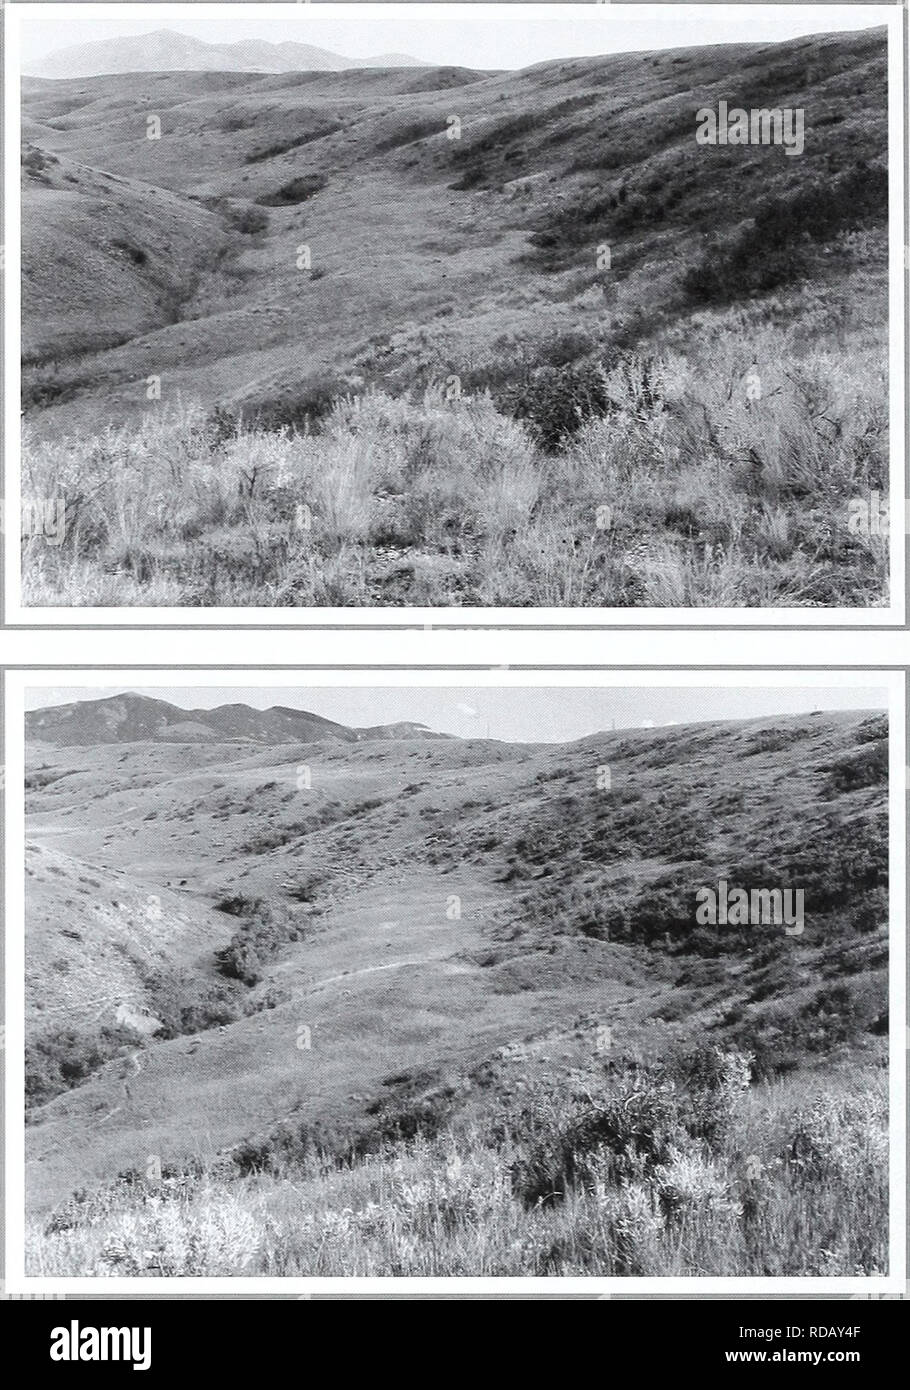 . Eighty years of vegetation and landscape changes in the Northern Great Plains : a photographic record. Range plants; Landscape; Botany; forbs; grasses; landscapes; botanical composition; shrubs; trees. Original Photograph September 18, 1917. Shantz 0-8-1917. Facing east. First Retake and Description June 30, 1959. W.S.P., H-9-1959. Looking up a side creek bottom from Judith River. Andropogon scoparius was abundant in the original picture but very rare in the retake. Shepherdia canadensis along creek much increased (from Phillips 1963. p. 25). Second Retake July 21, 1998. Kav-4326-35.. Â»W*fe Stock Photo